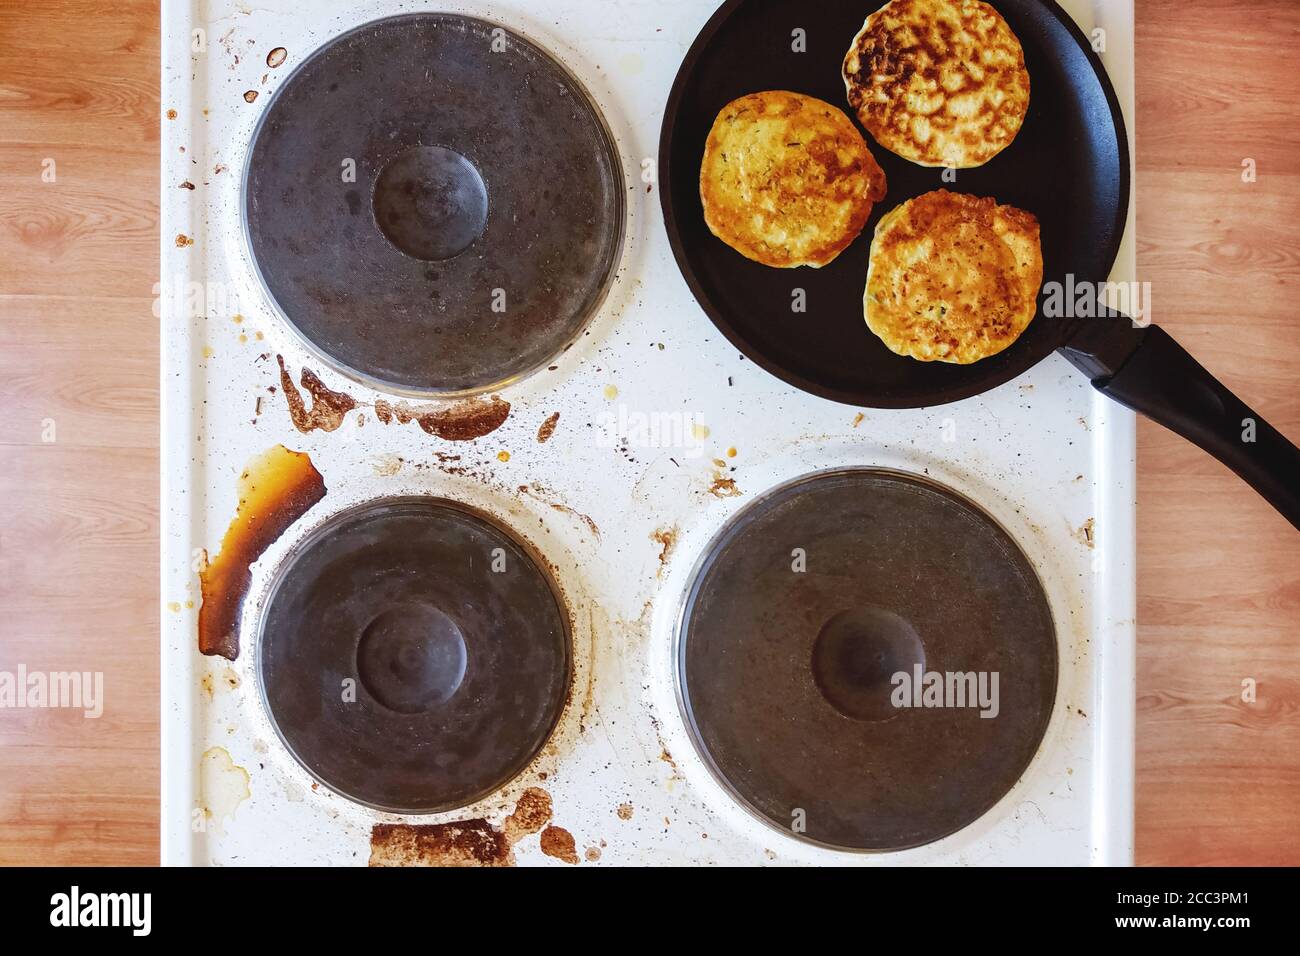 dirty kitchen stove with stains of burnt food and fat, frying pan with pancakes on top Stock Photo